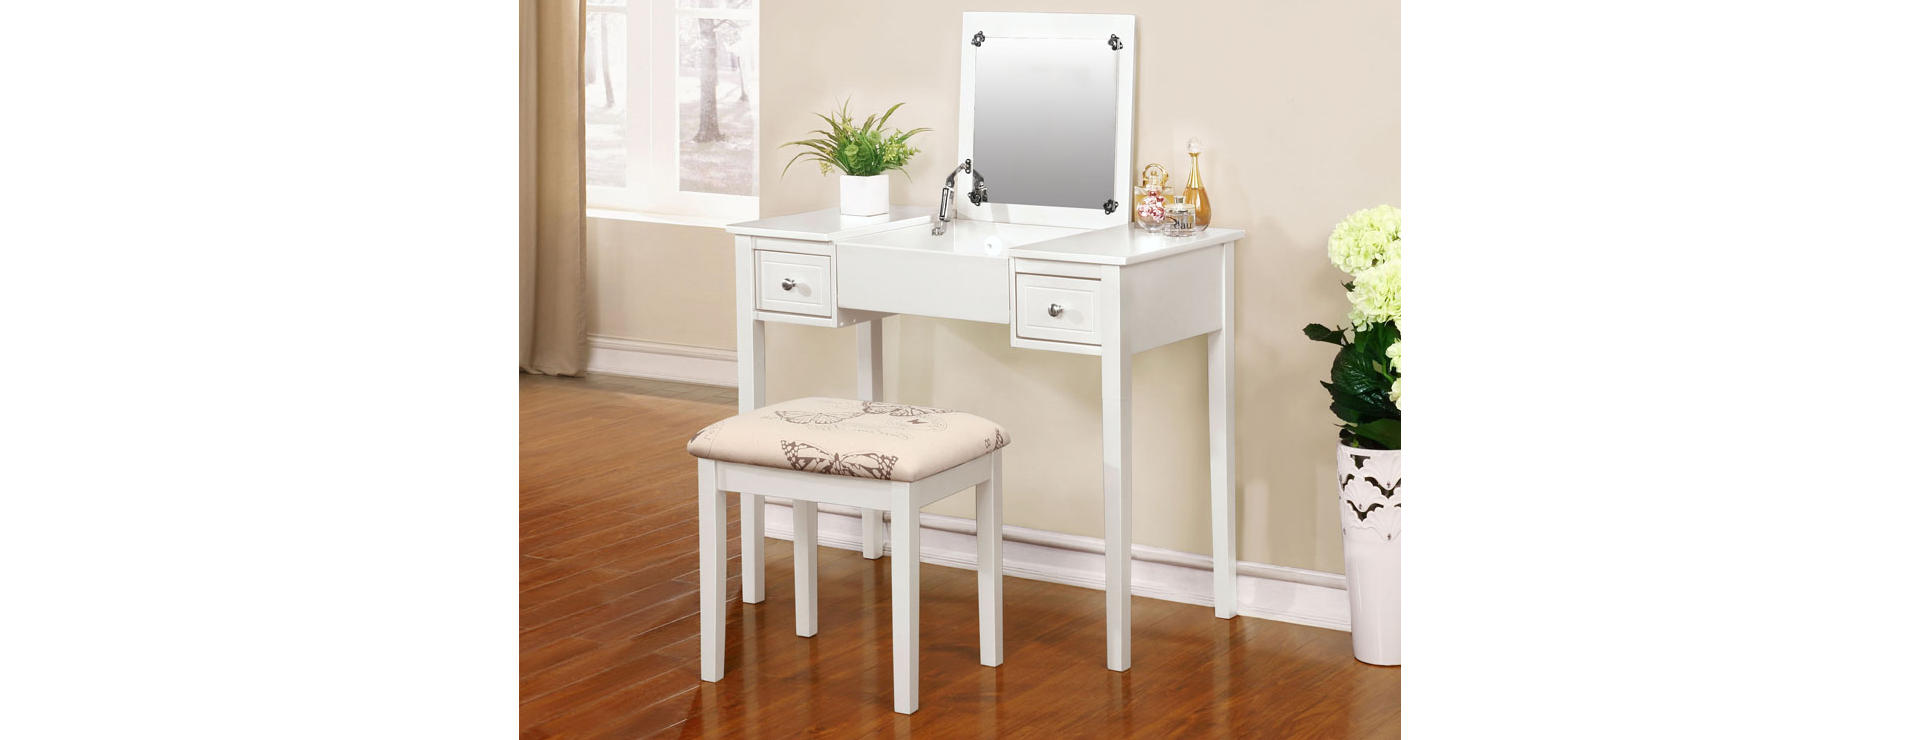 Butterfly Mirror Vanity Set with Stool - Big Lots